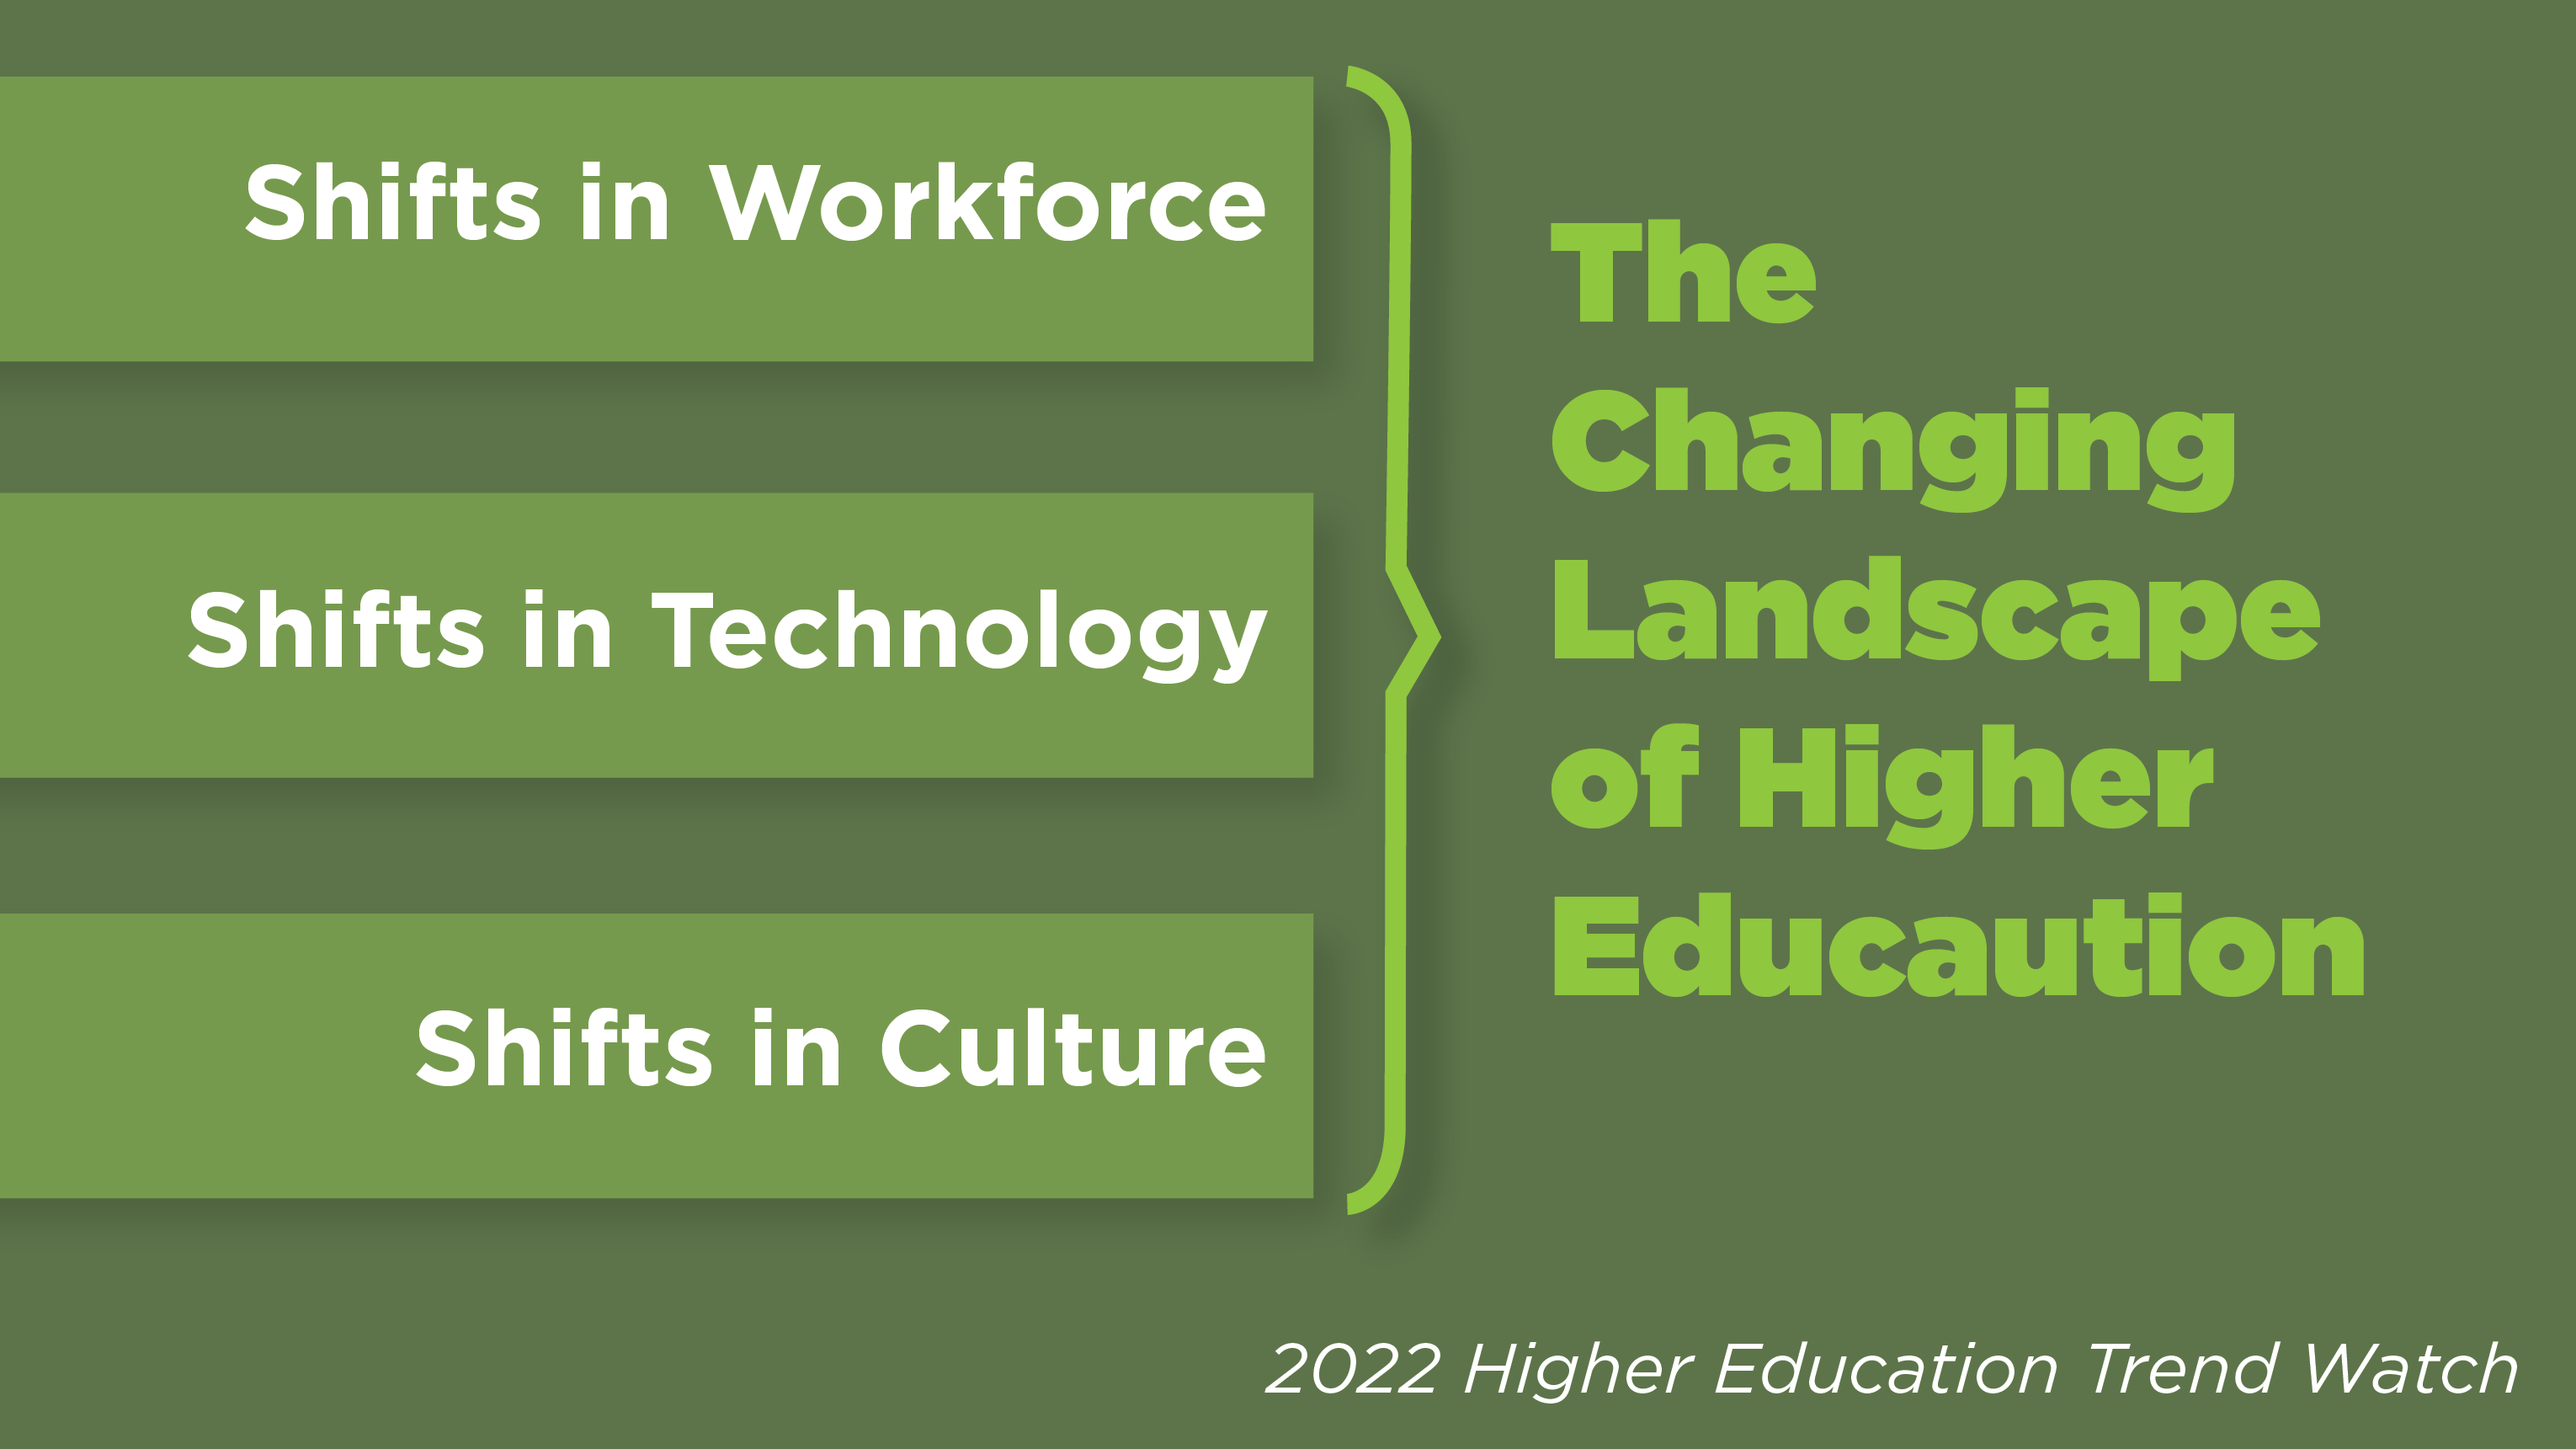 The Changing Landscape of Higher Education: Shifts in Workforce; Shifts in Technology; Shifts in Culture. 2022 Higher Education Trend Watch